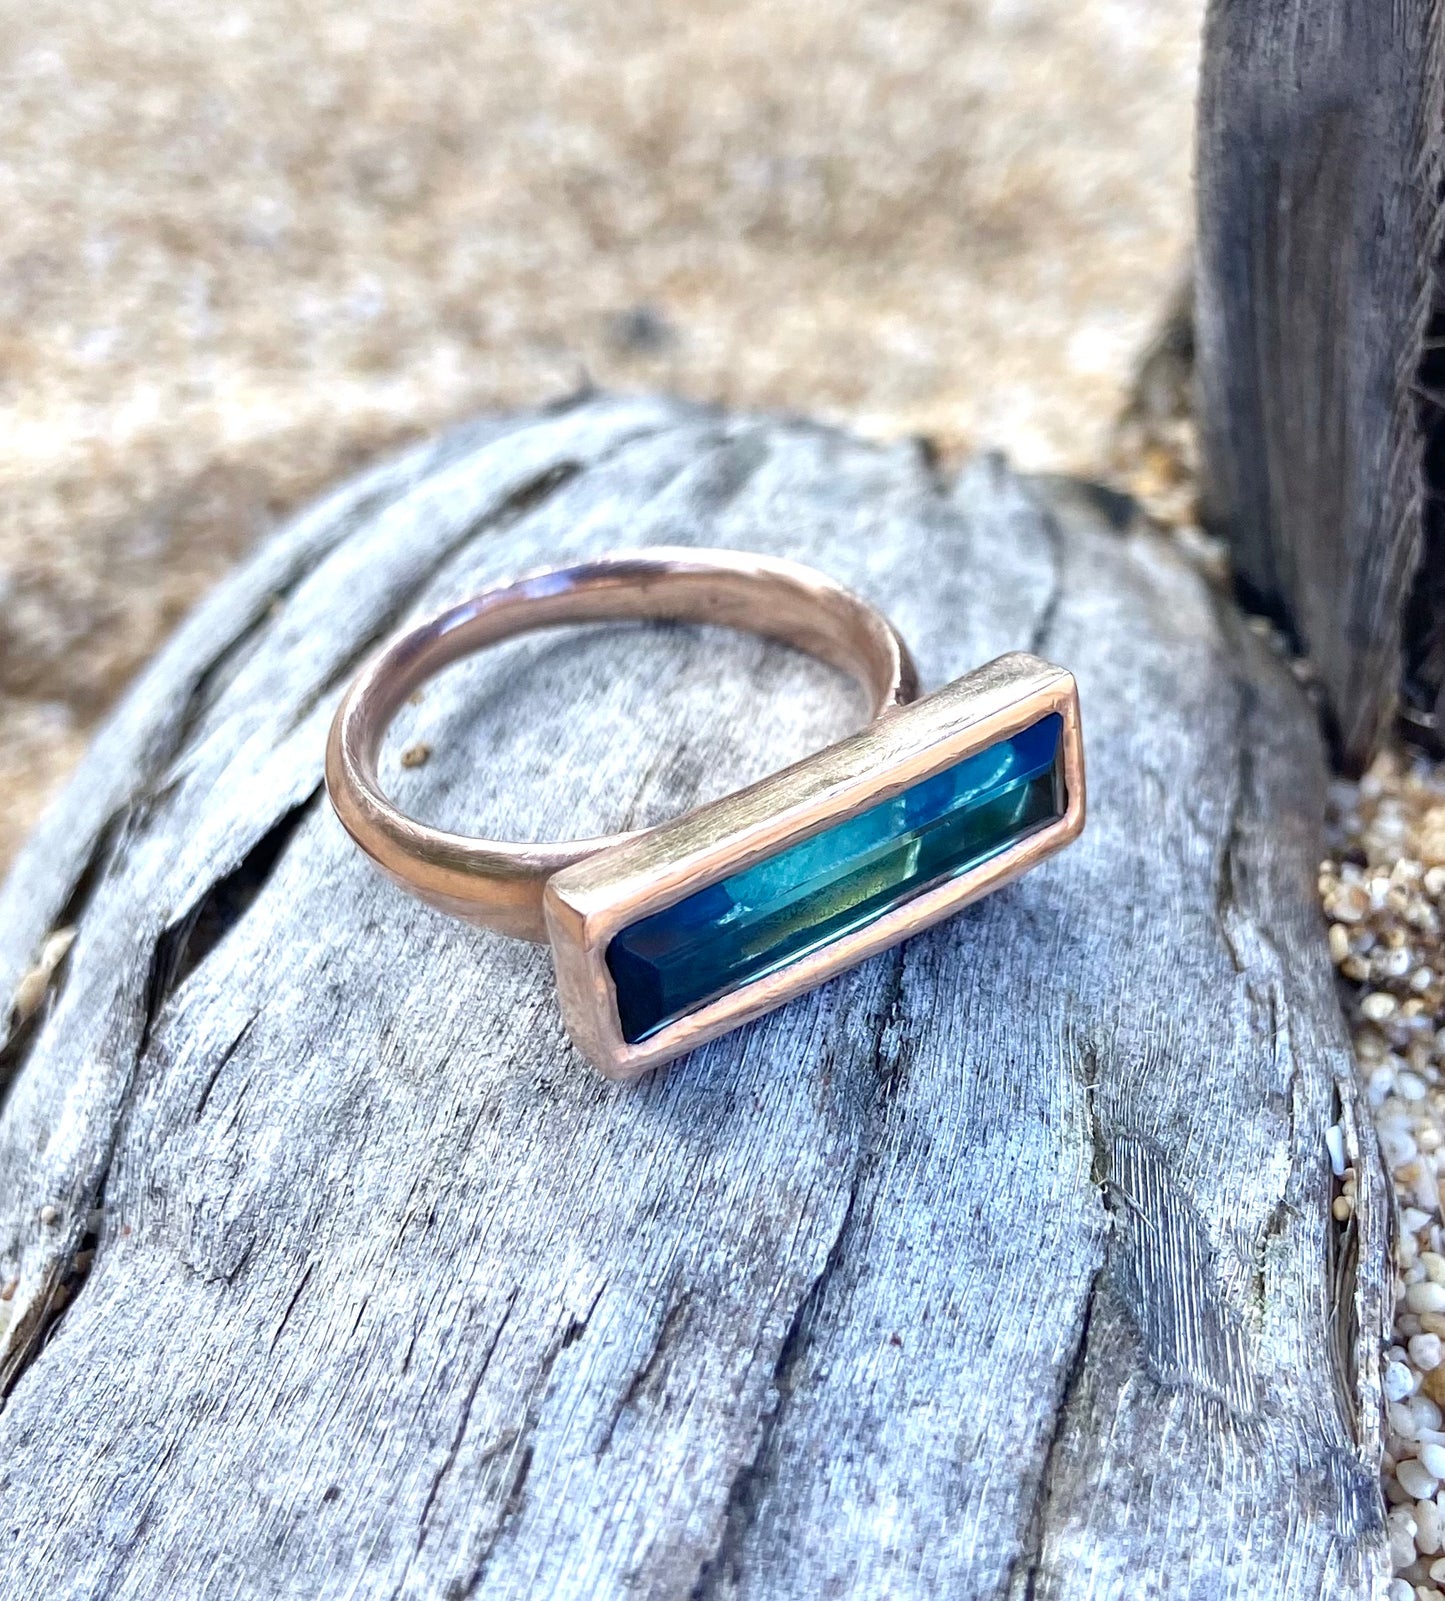 a blue rectangular stone in a rose gold setting sits on a piece of drift woond in the sand